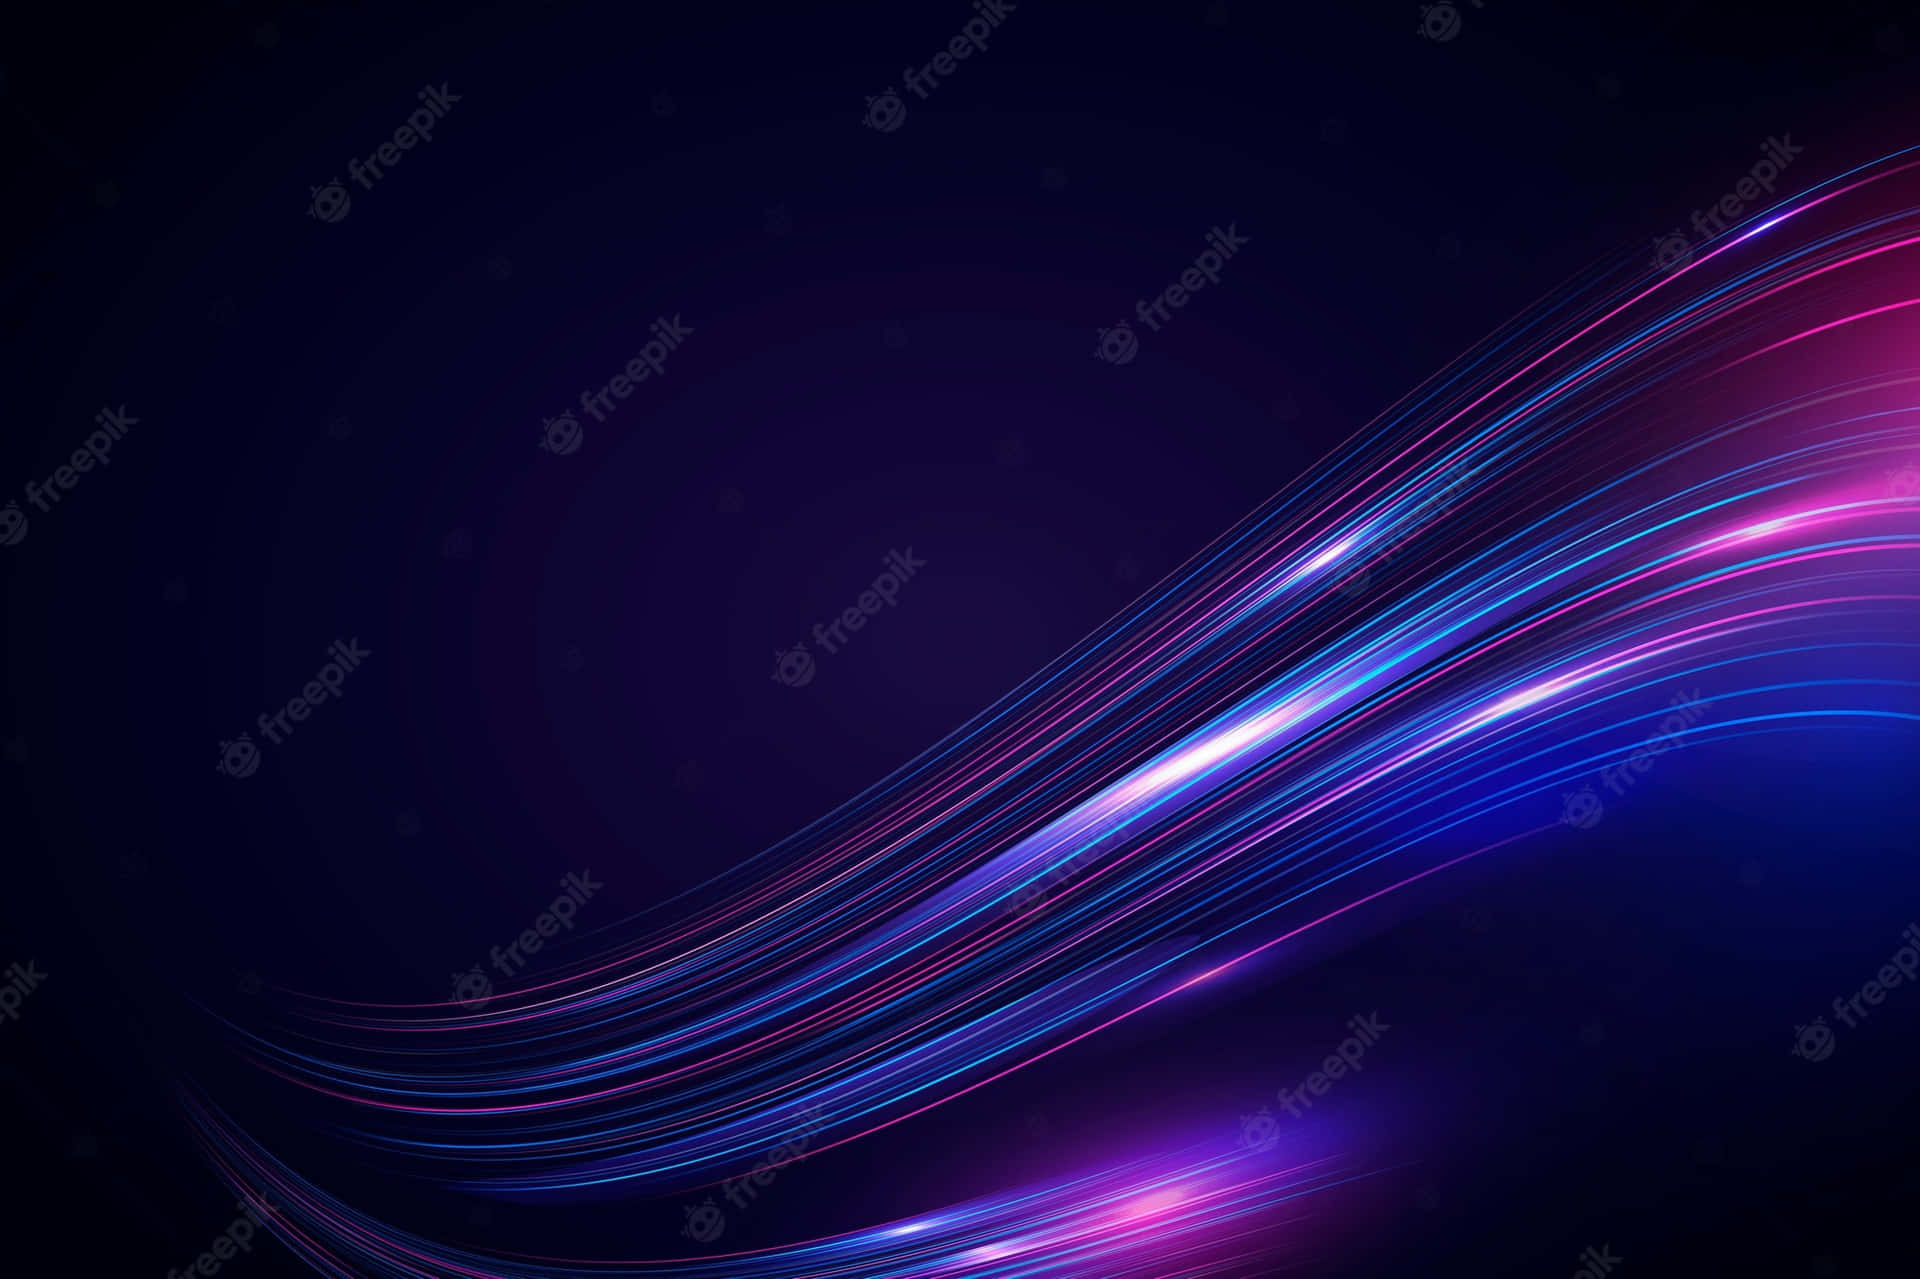 Neon Lights Shine Brightly in the Abstract Wallpaper